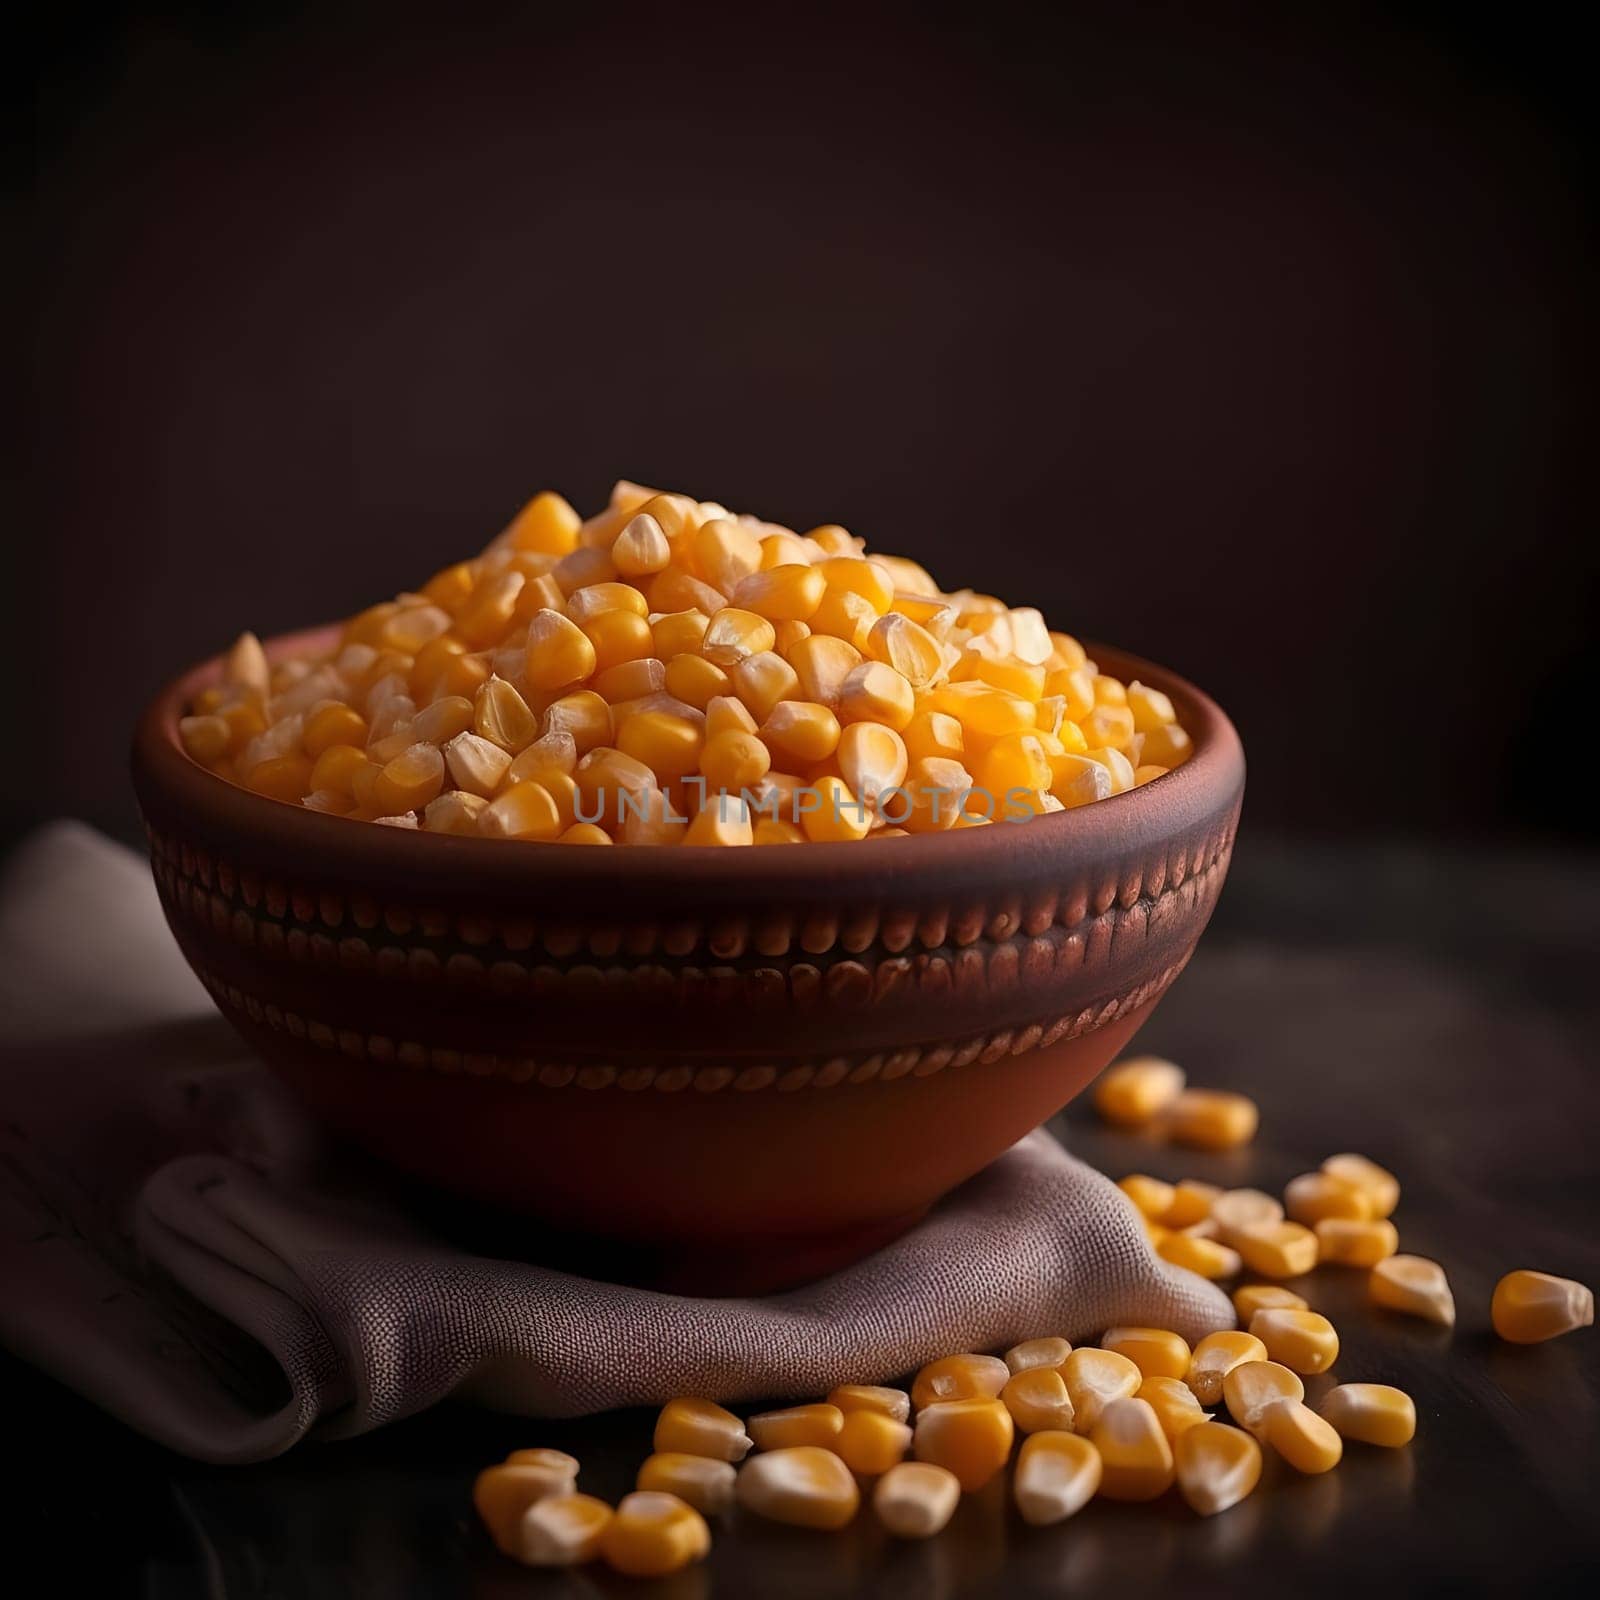 Small bowl filled with corn kernels, black background. Corn as a dish of thanksgiving for the harvest. by ThemesS